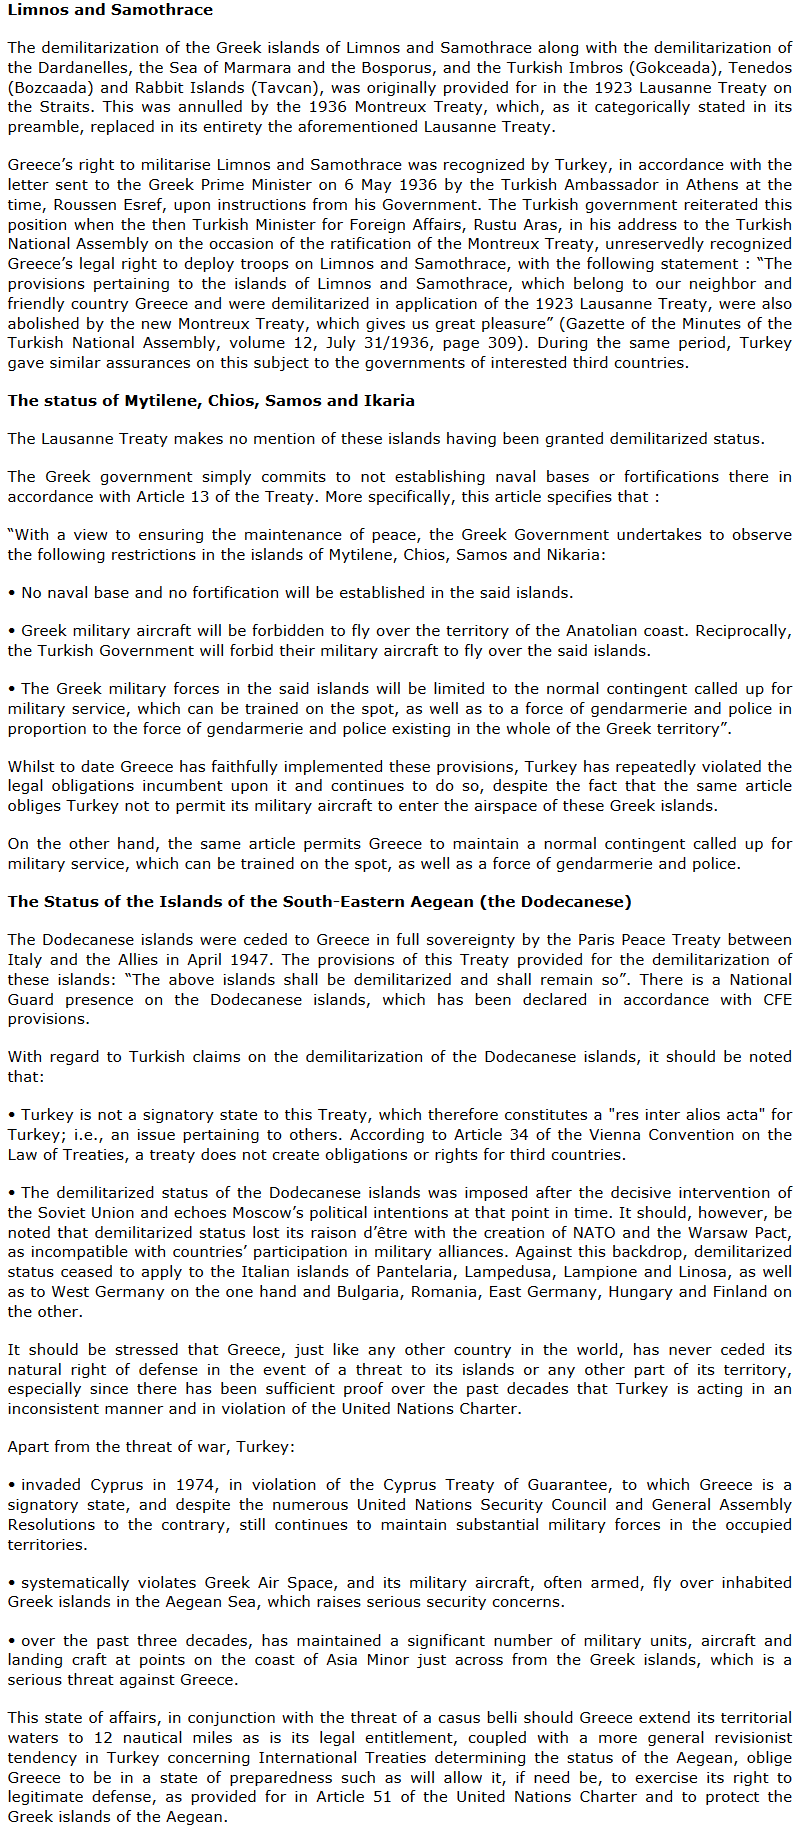 Screenshot_2021-10-12 Turkish claims regarding the demilitarization of islands in the Aegean S...png